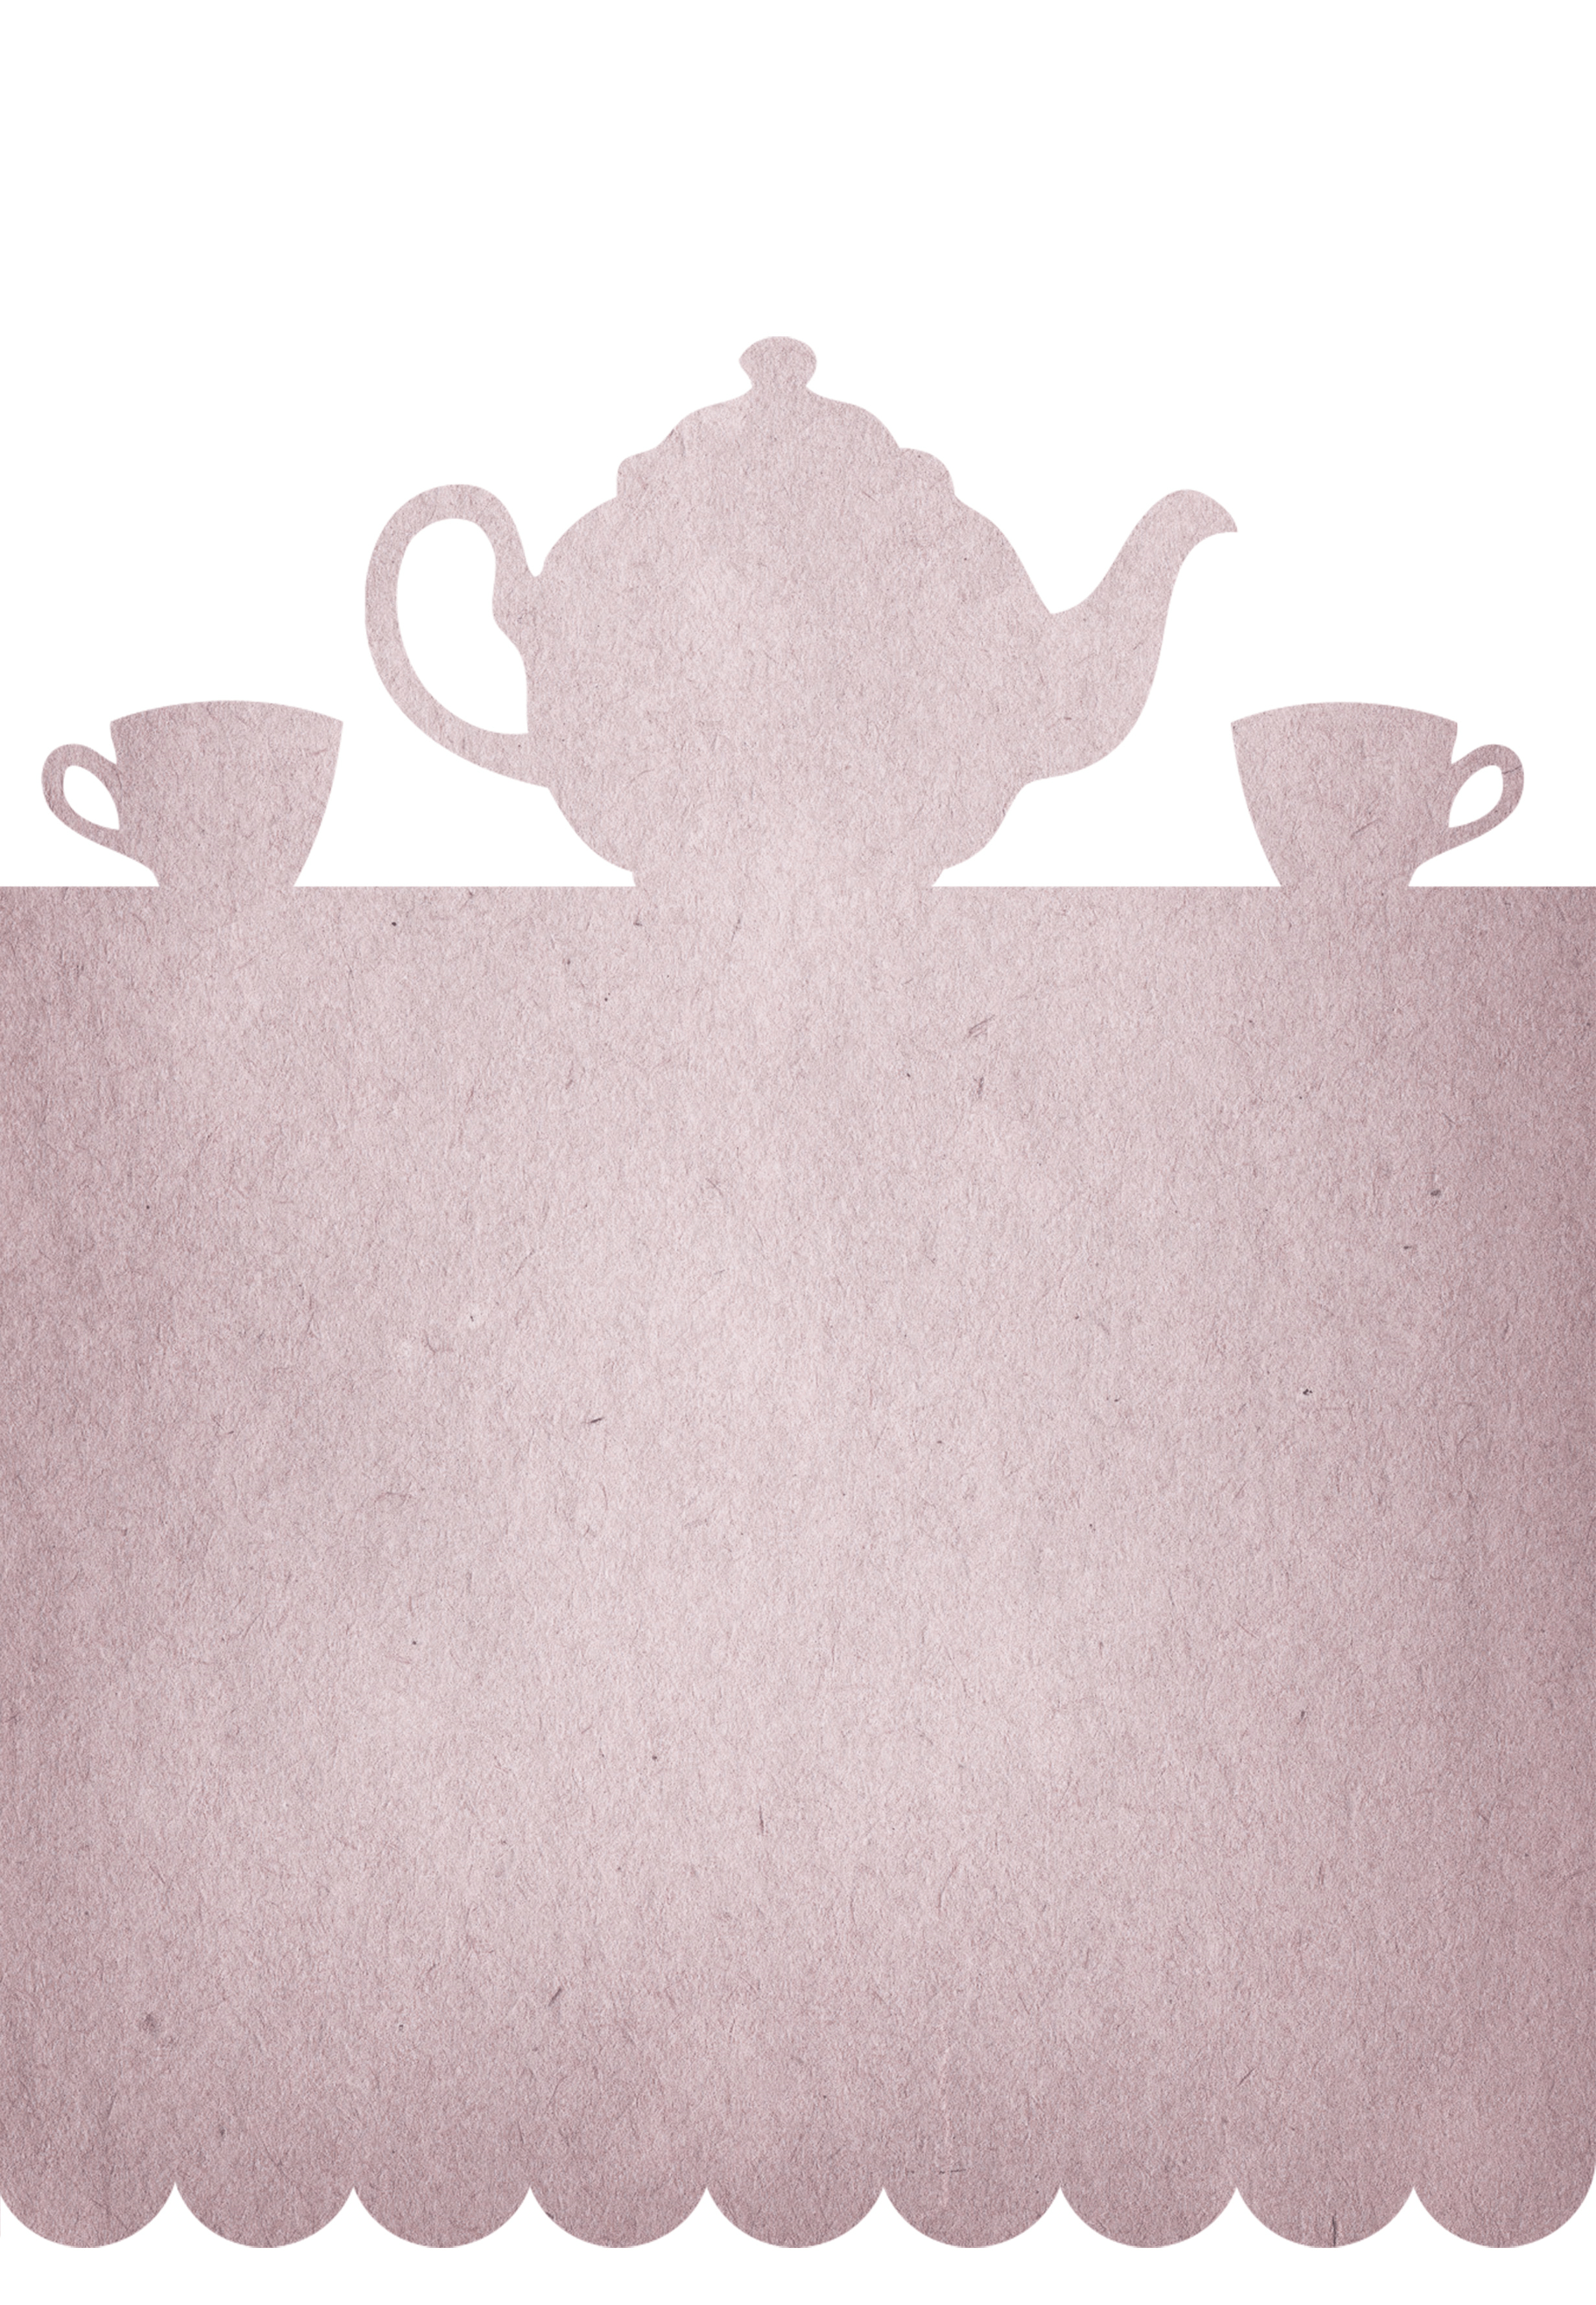 Tea Party Free Printable Party Invitation Template Greetings throughout size 2462 X 3556